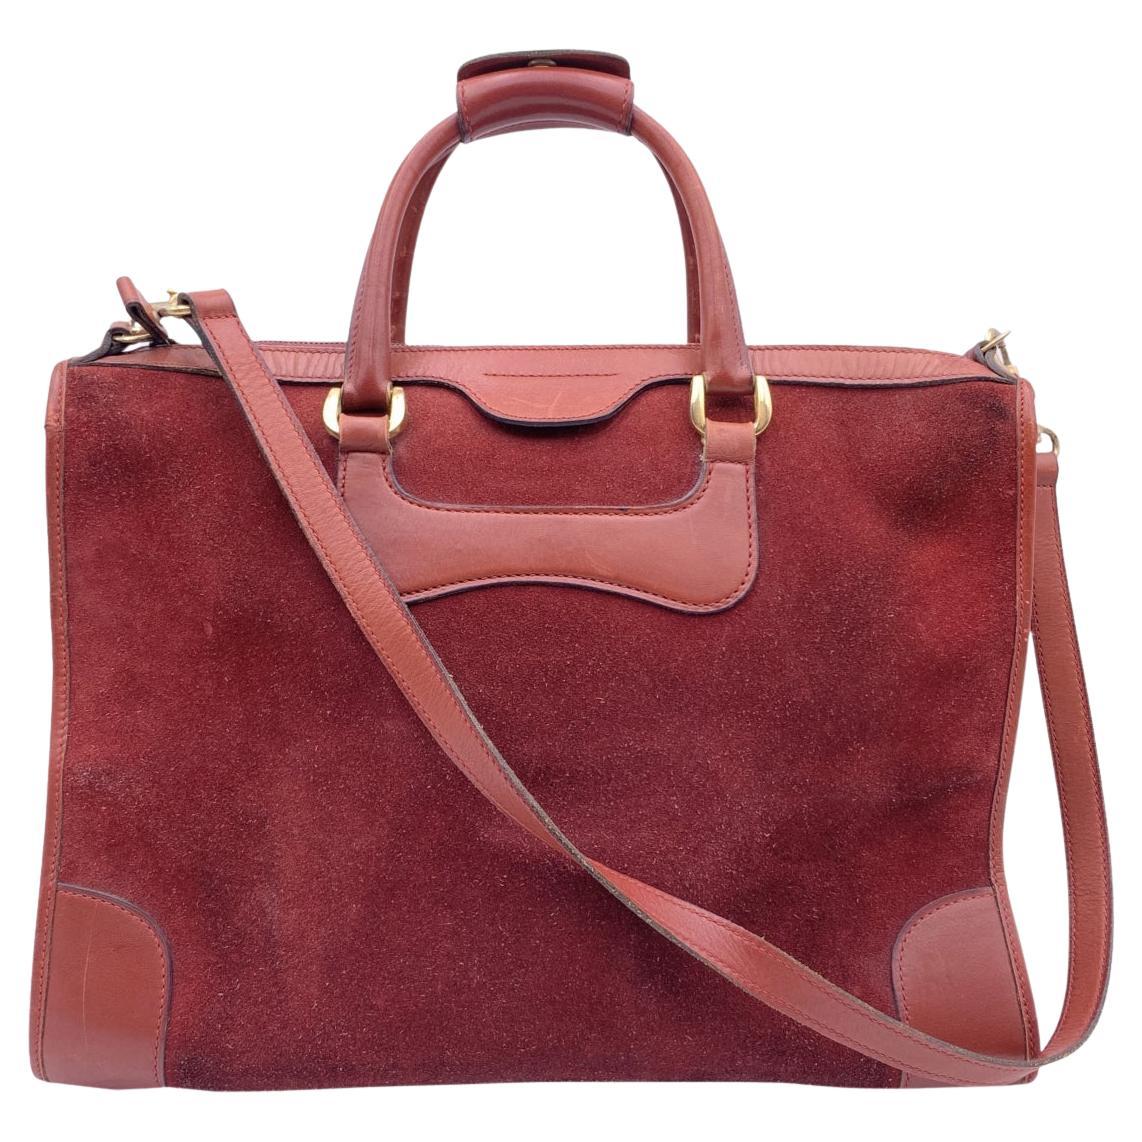 Gucci Vintage Burgundy Suede and Leather Tote Satchel with Strap